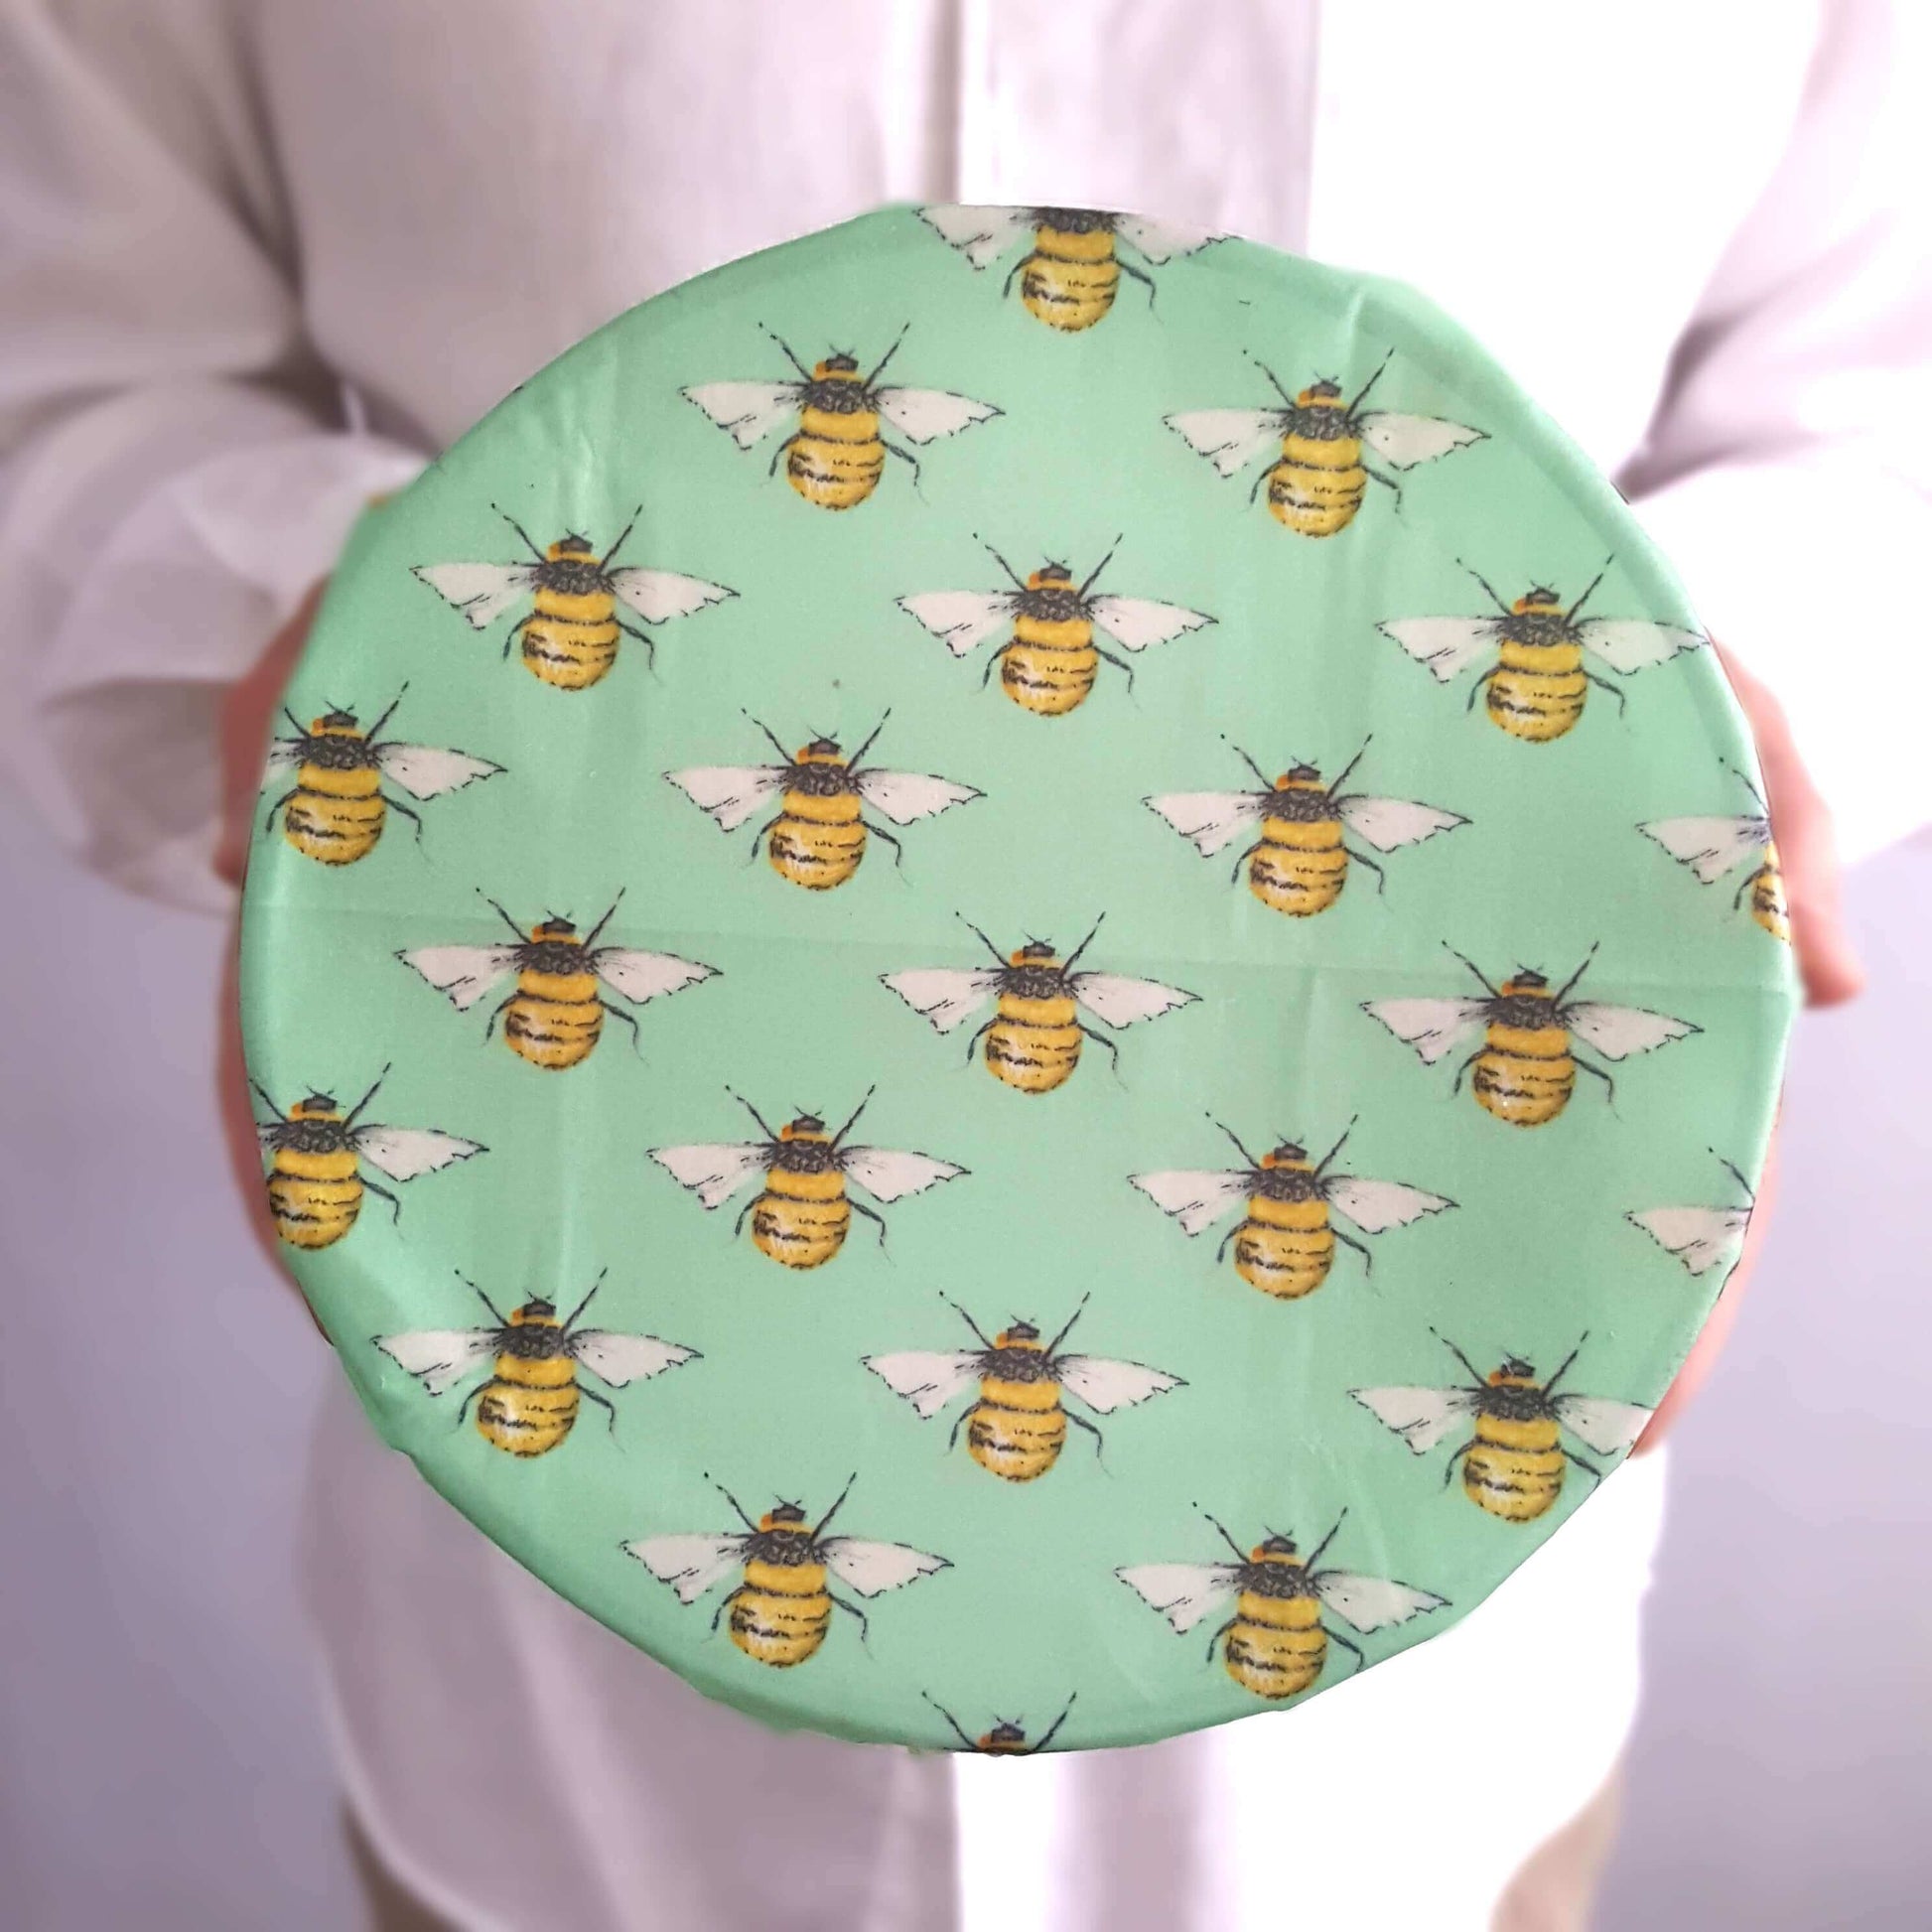 Wings Earth Kind Sandwich & Bowl Set of 2 Large Beeswax Wraps shown in use